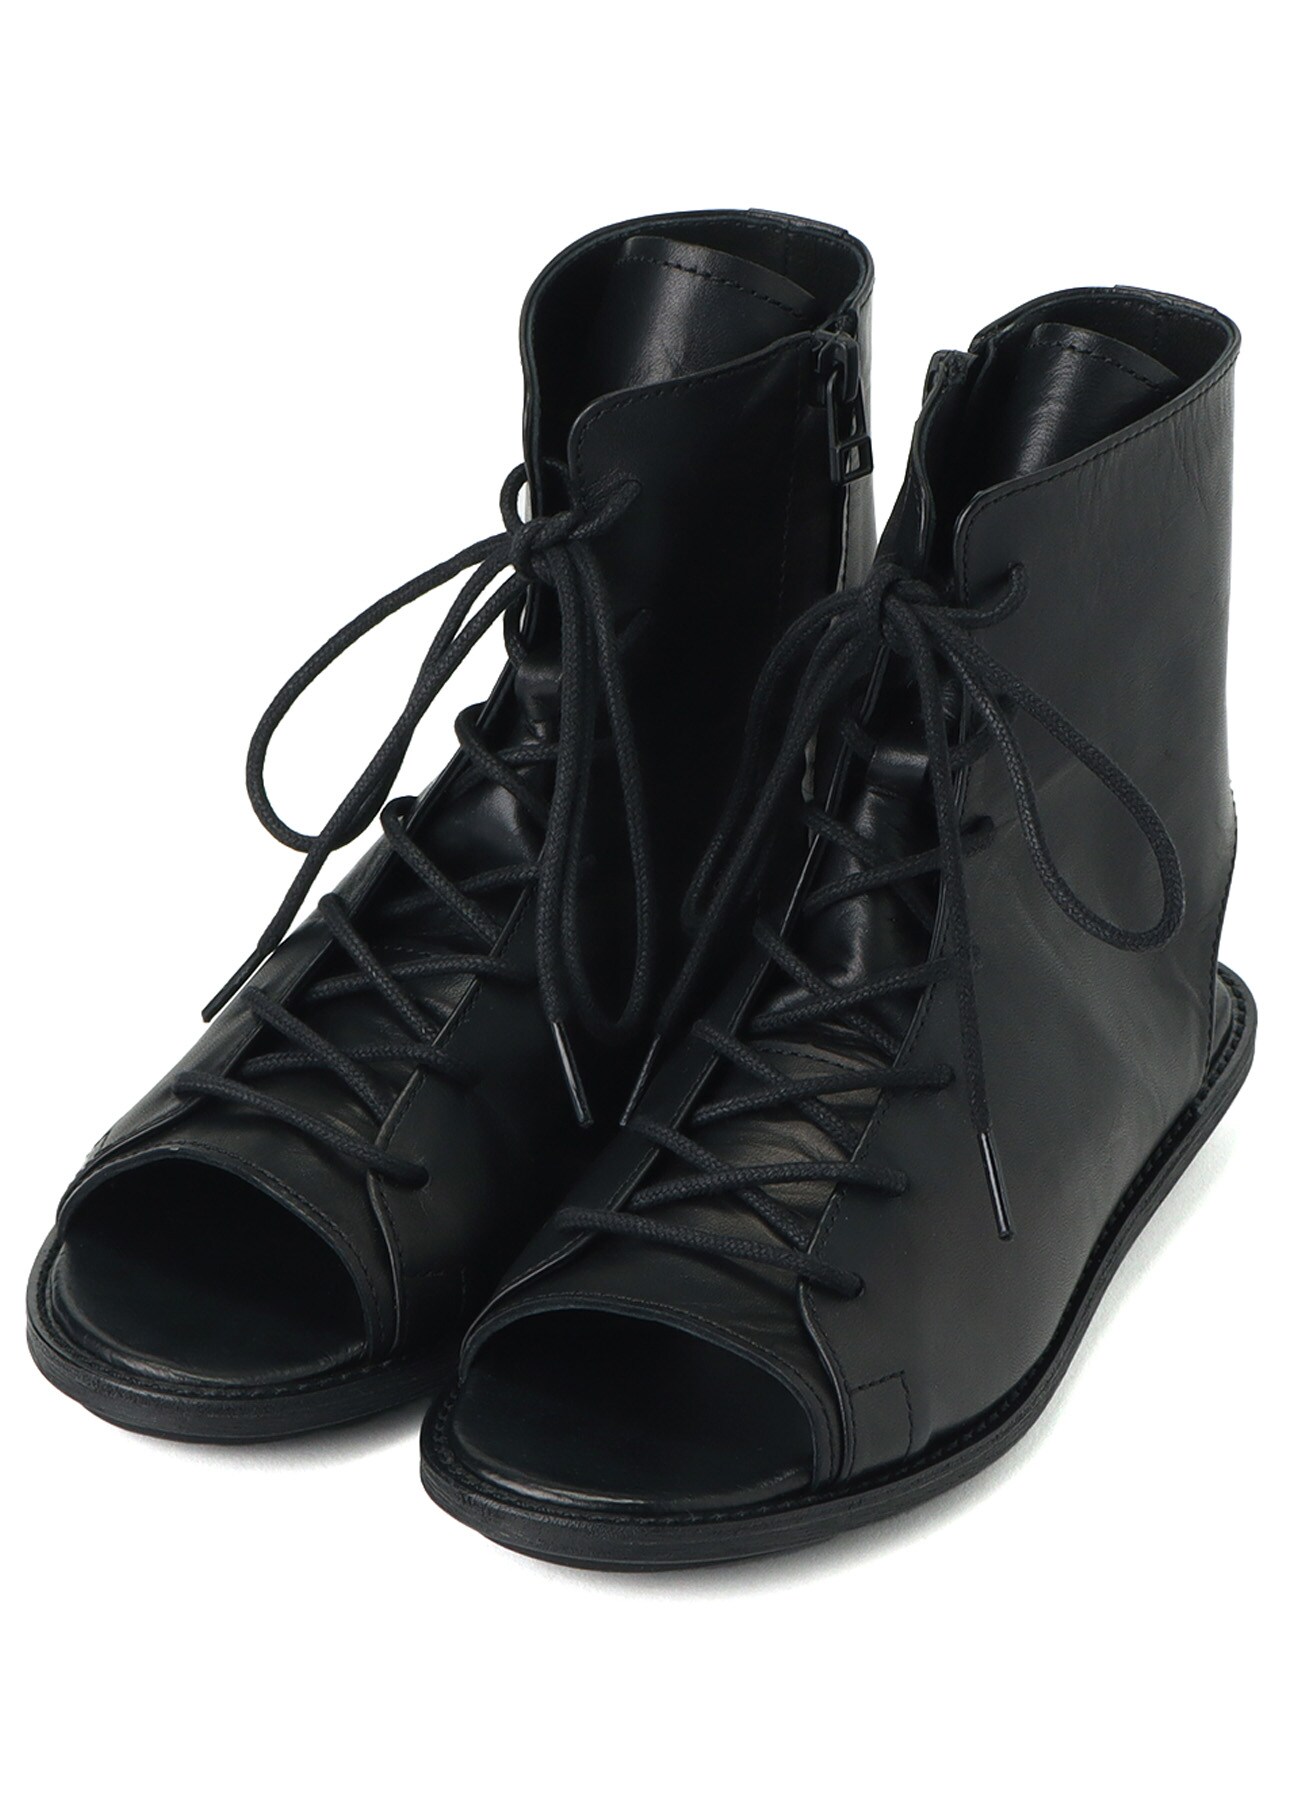 MATTE HORSE LEATHER OPEN-TOE BOOTS	